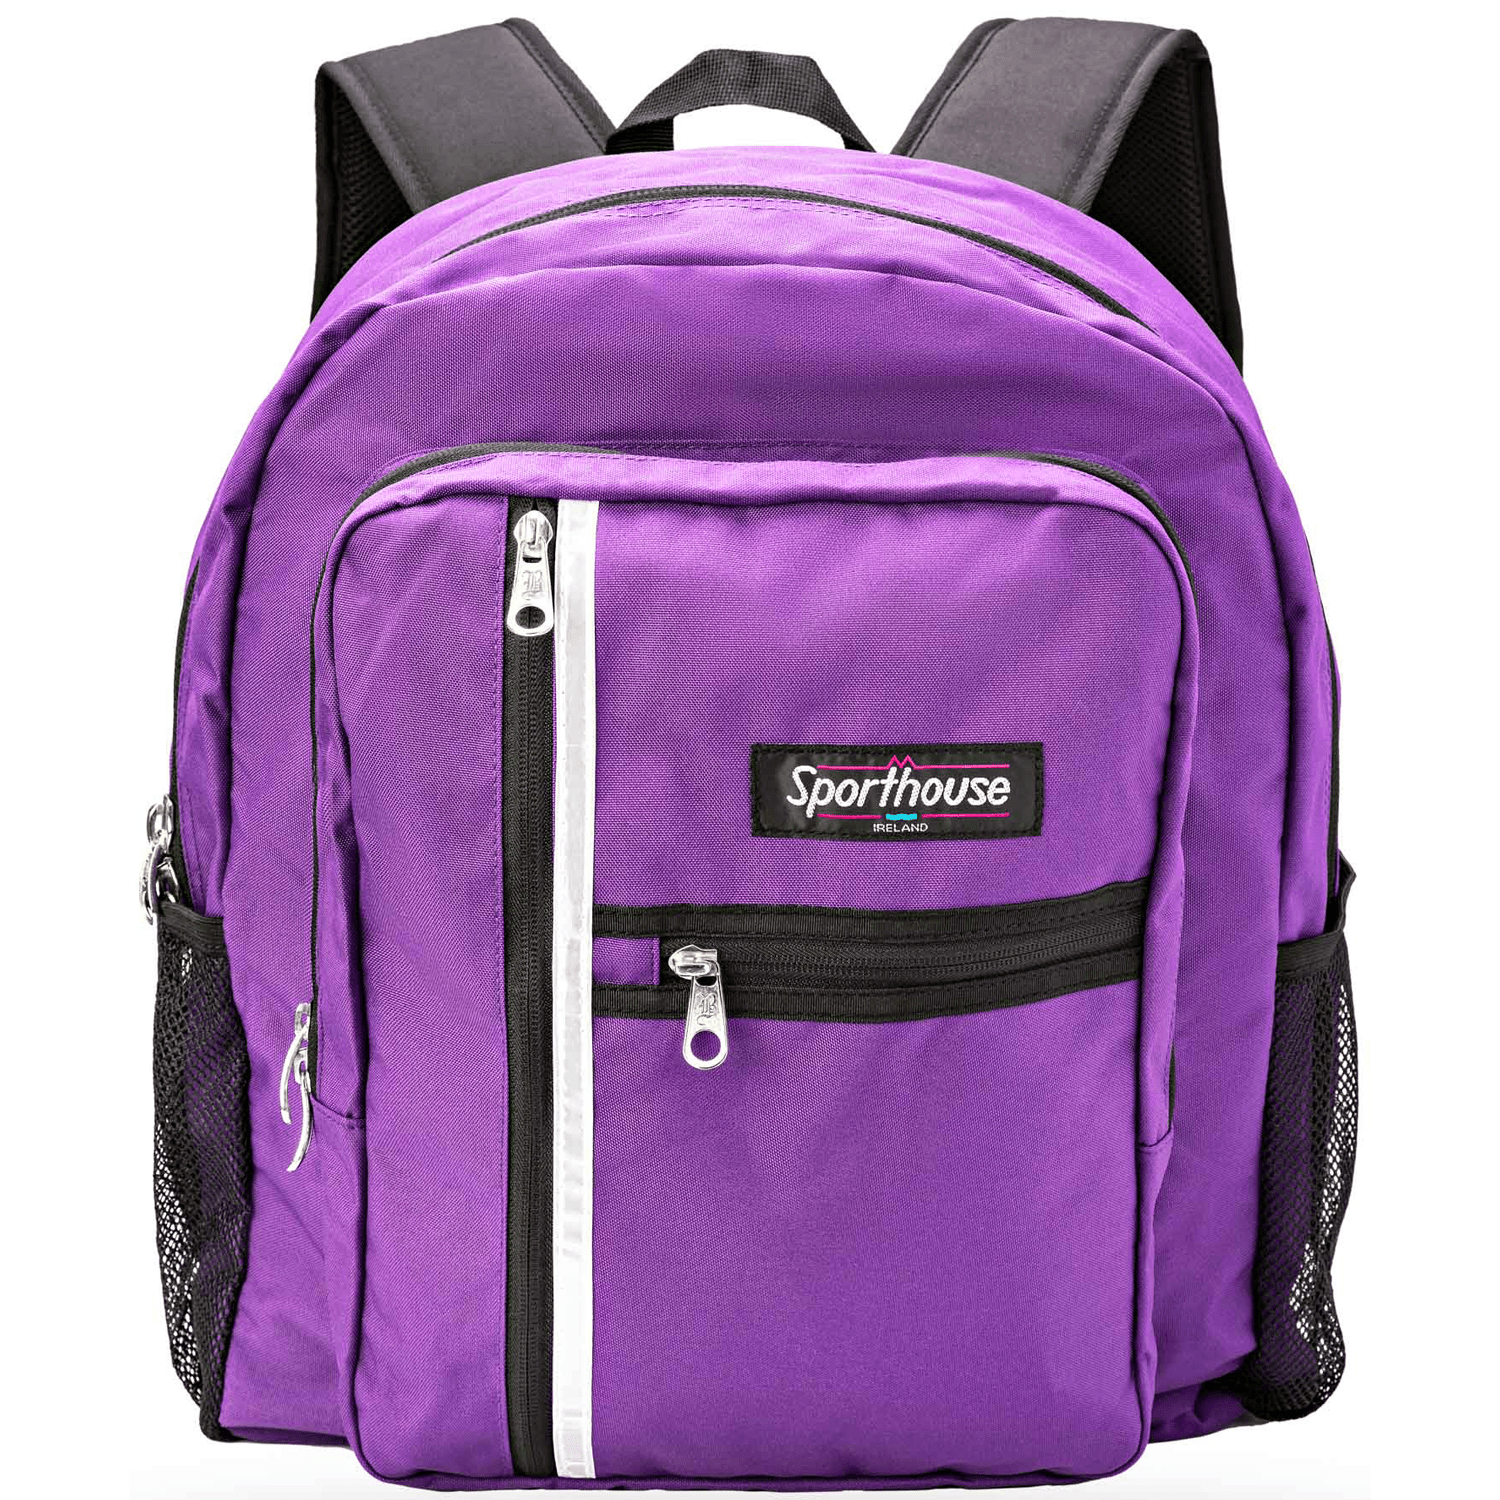 Sporthouse Student 2000 42L Backpack - Purple 1 Shaws Department Stores